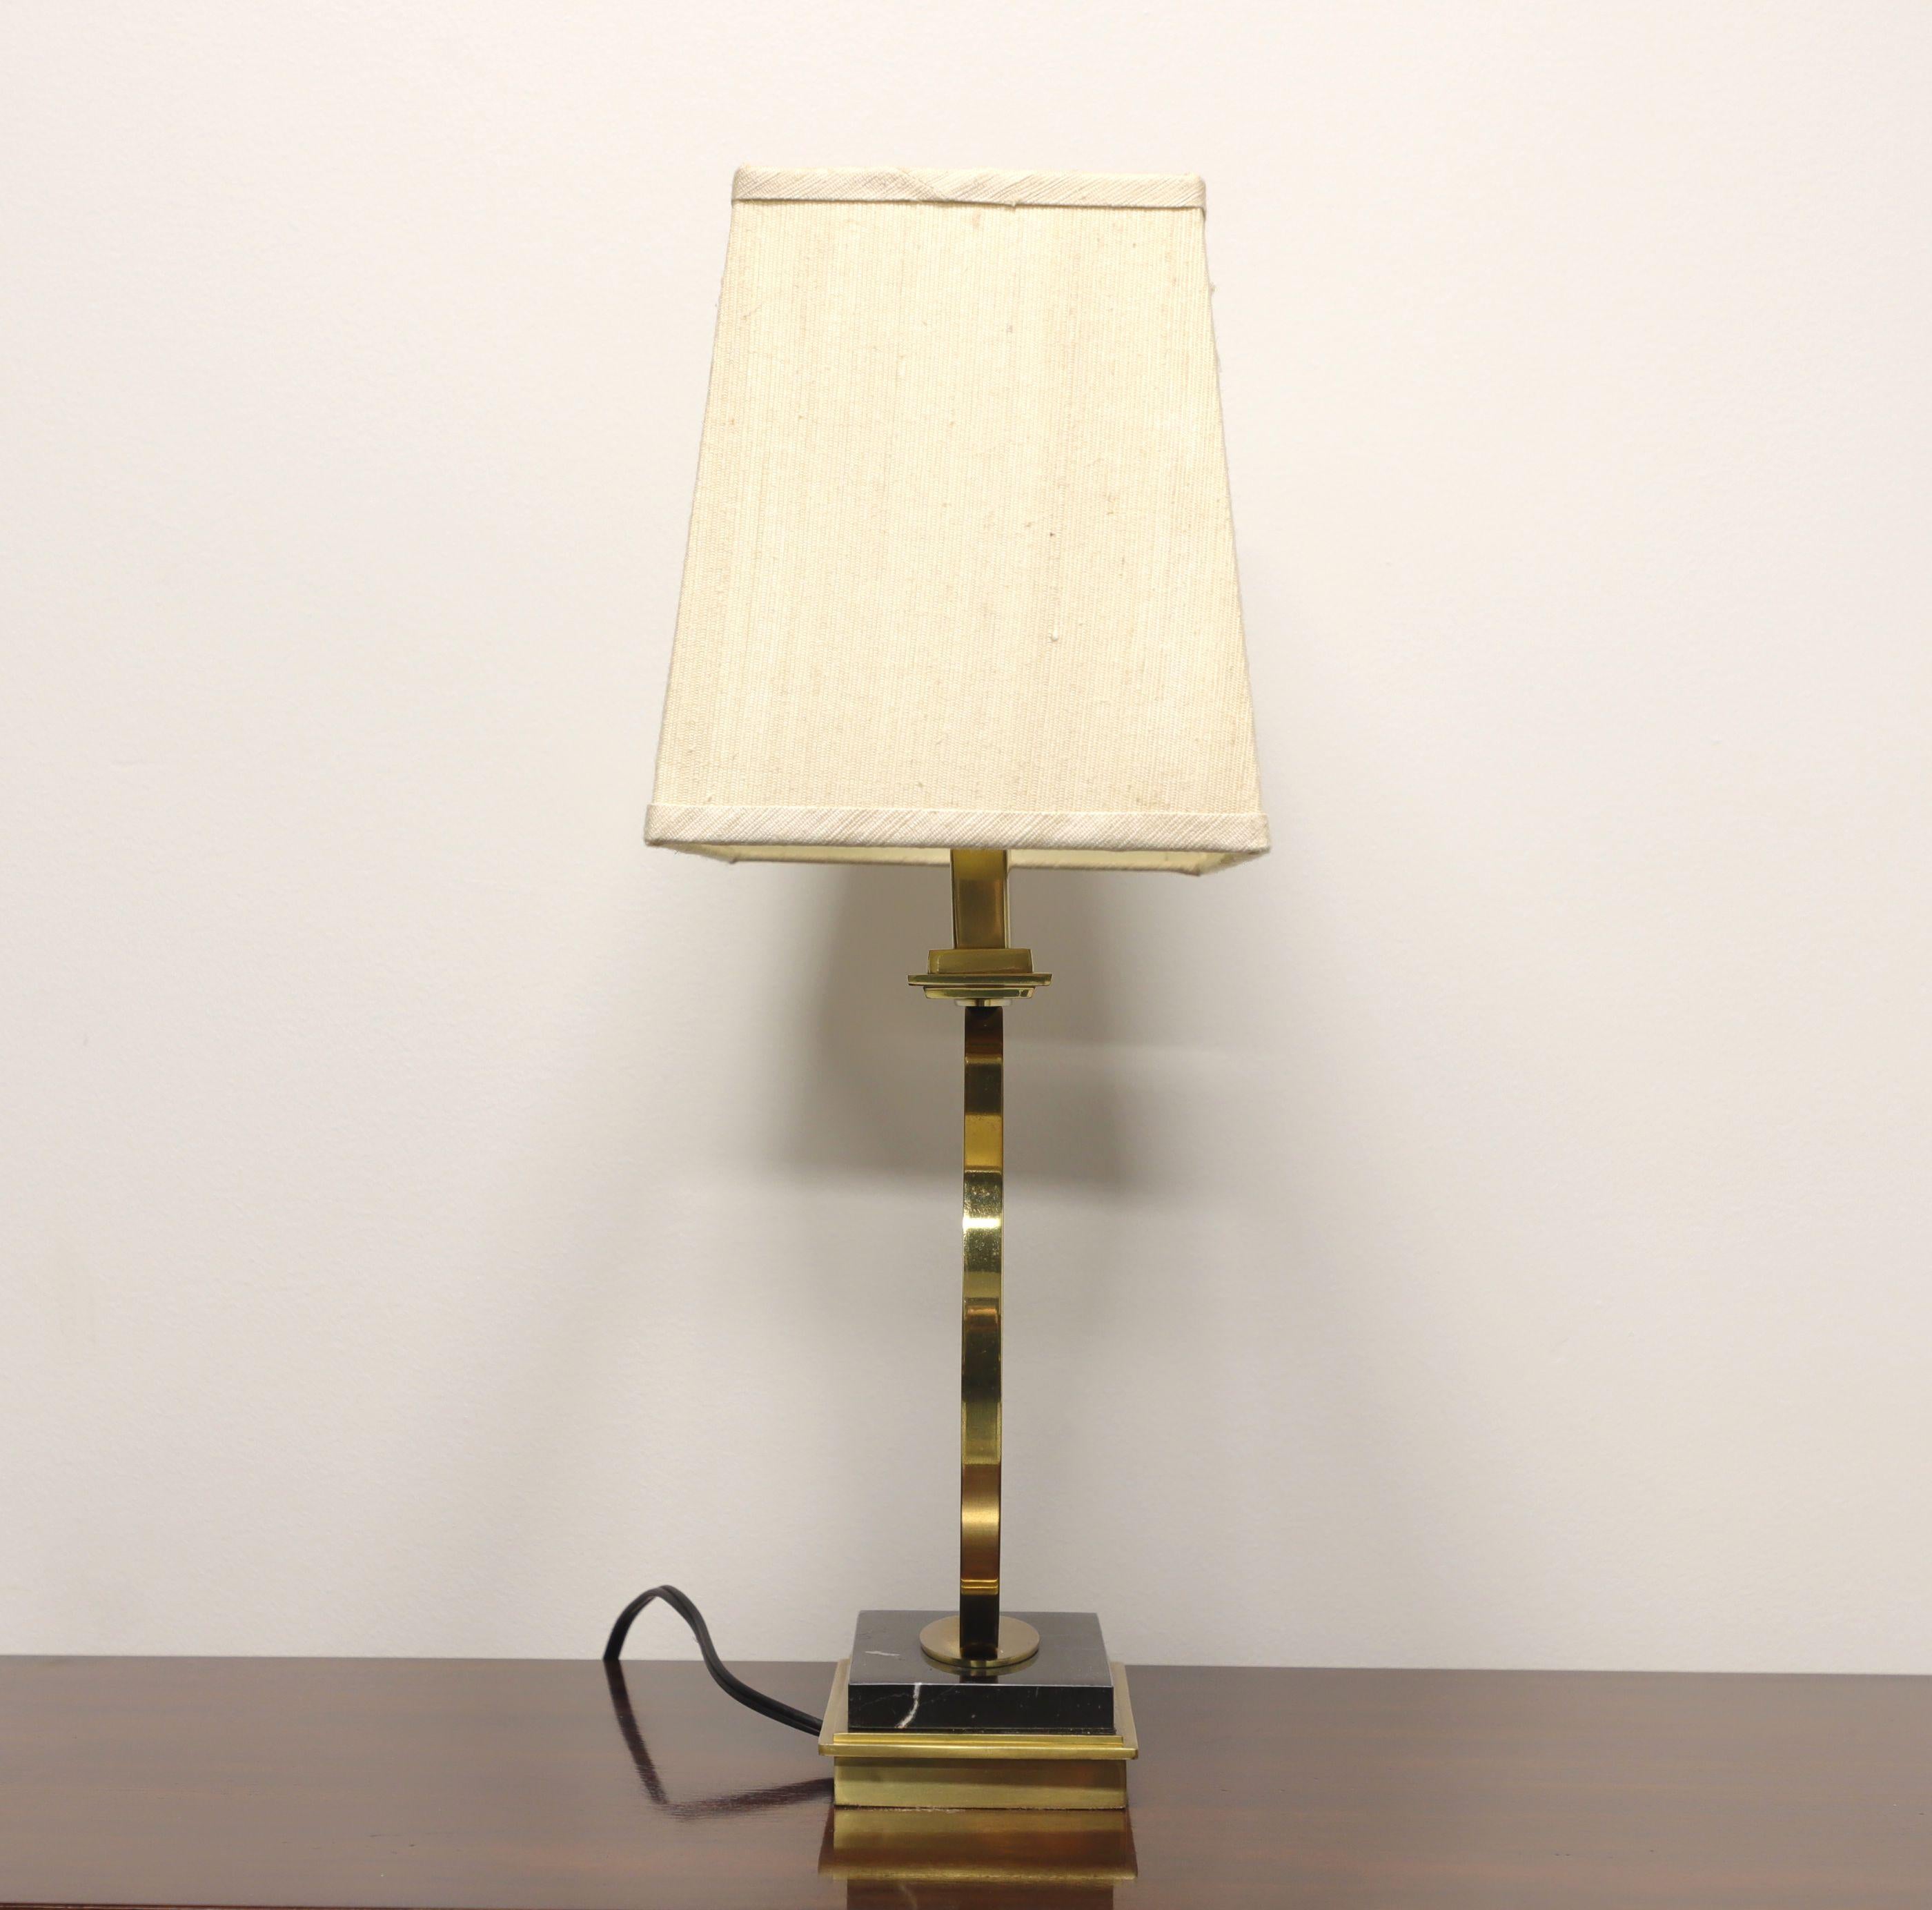 A Contemporary Modern style table lamp, unbranded. Solid brass in a circular design with a marble on brass base. Single standard bulb socket and 3-way rotary switch. Includes rectangular fabric shade.

Measures: 15.25 W 8.25 D, Base to Finial: 23 H,